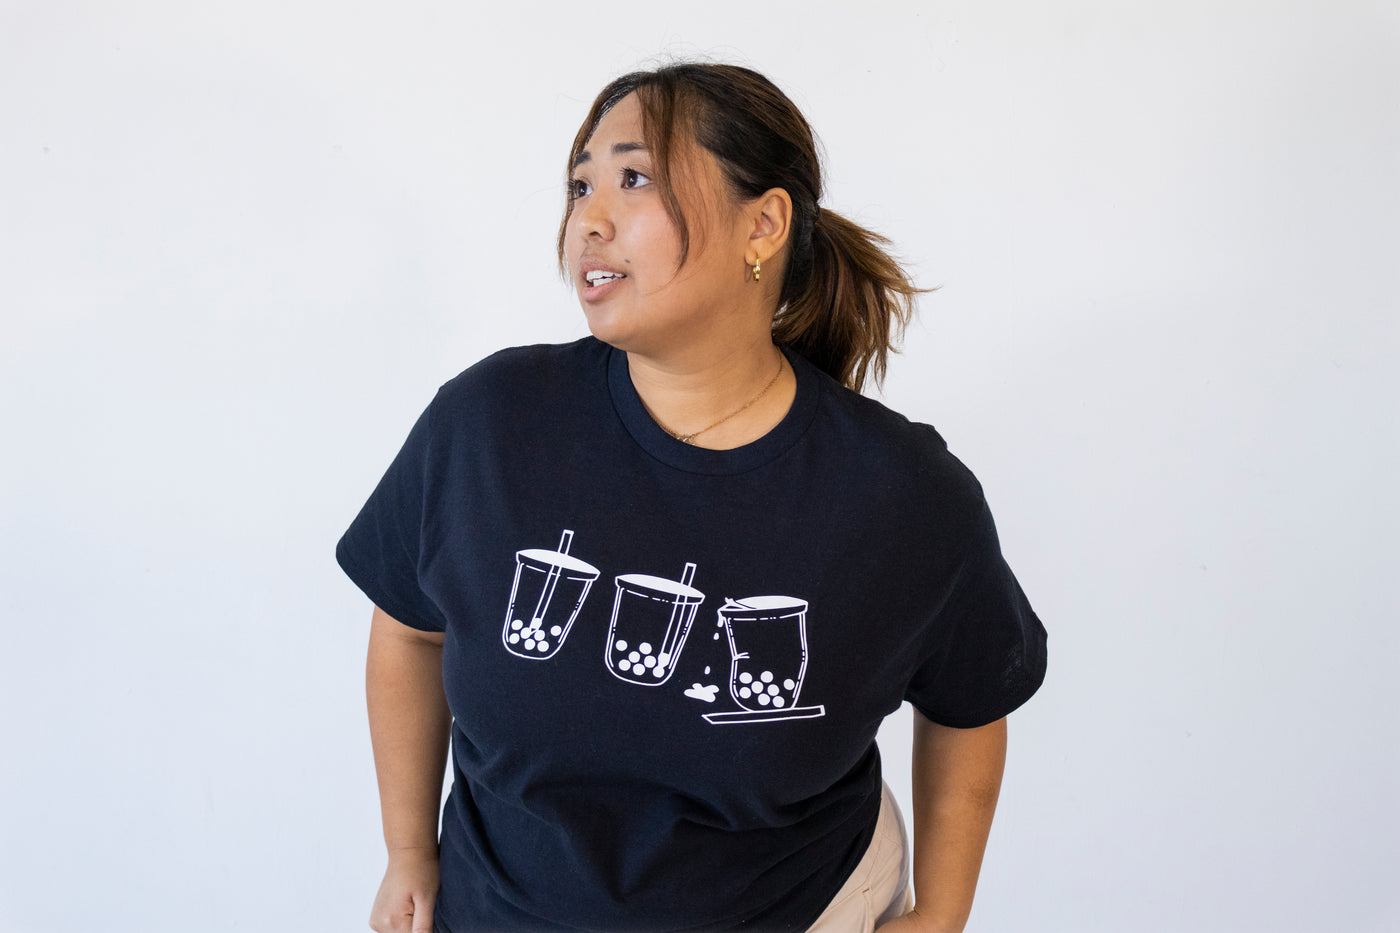 Boba Bliss Graphic Tee: Celebrate Your Boba Love in Style